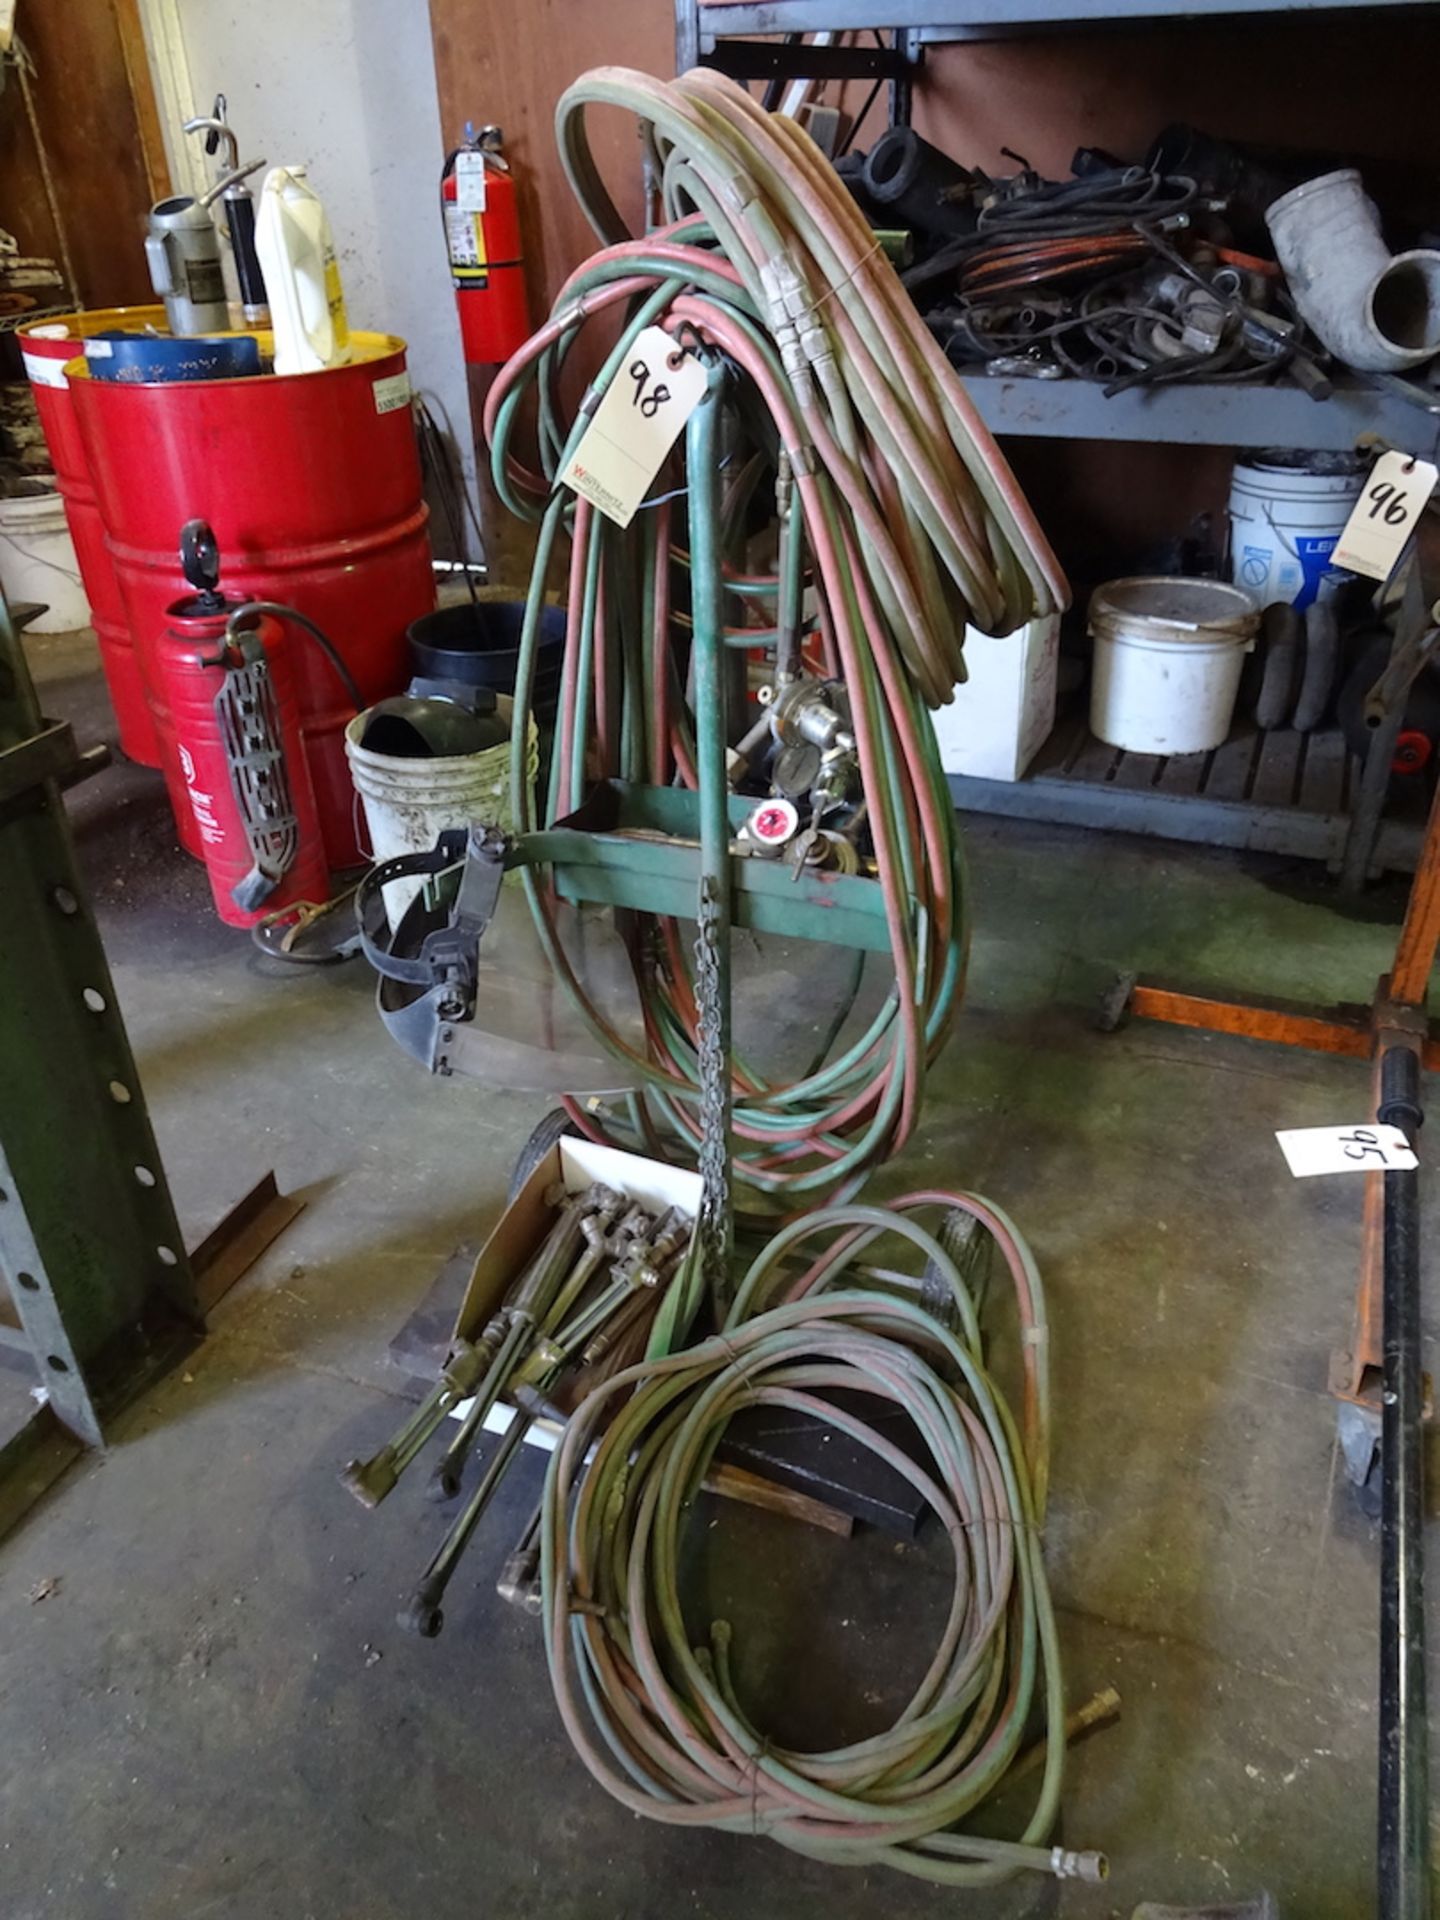 WELDING CART WITH OXYGEN/ACETYLENE GAUGES, LOTS OF TORCHES, HOSES AND FACE SHIELD, NO TANKS